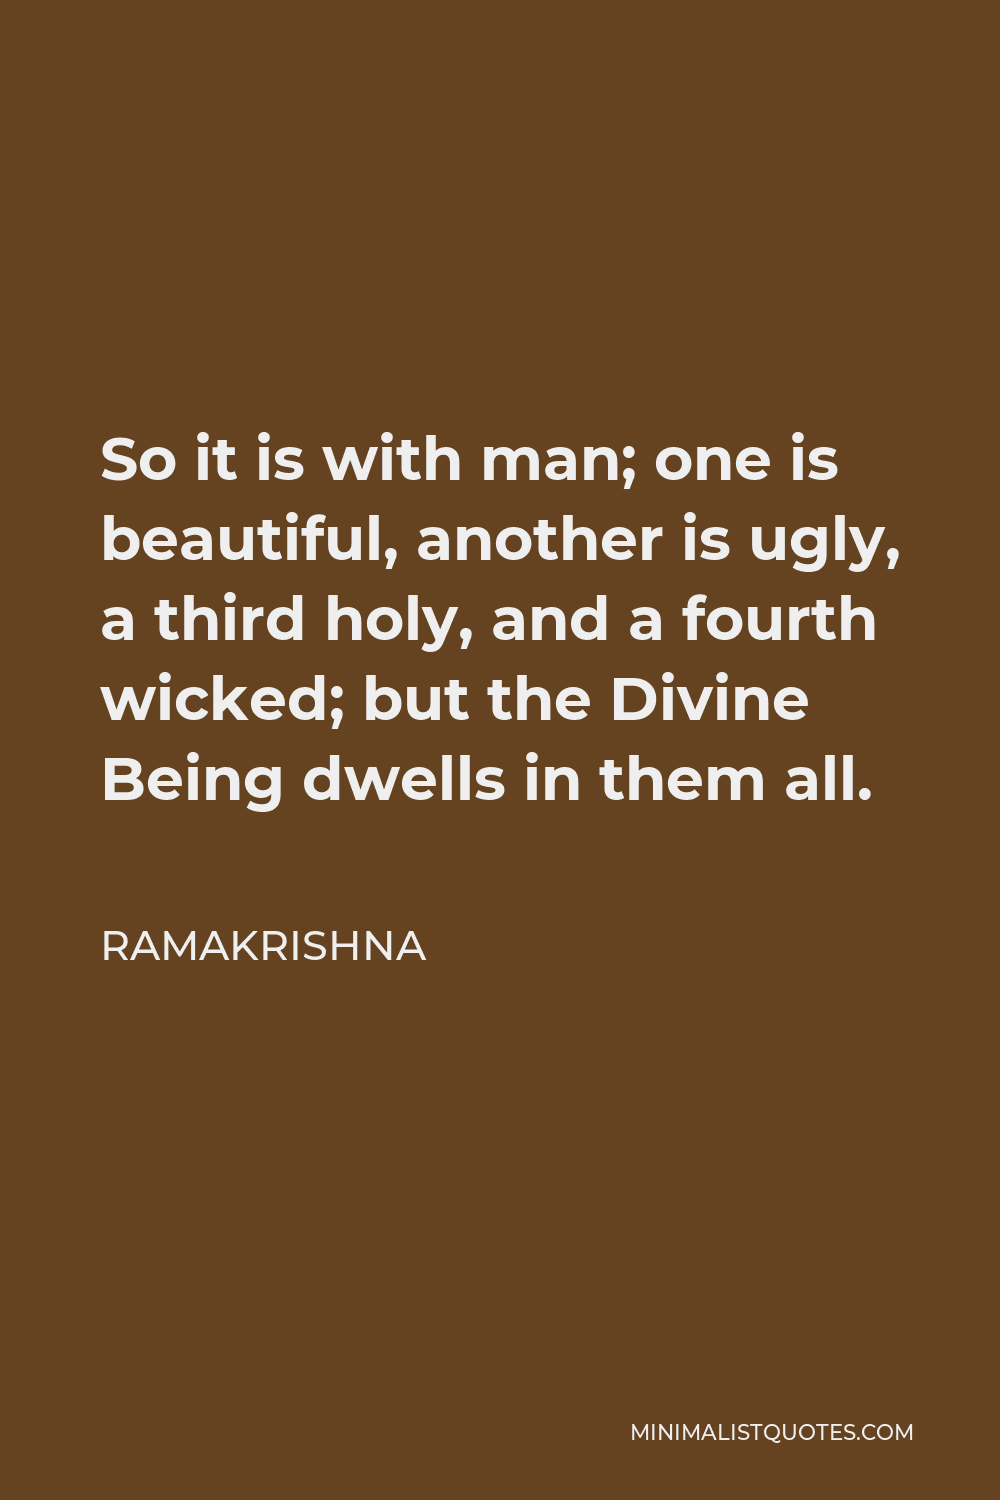 Ramakrishna Quote - So it is with man; one is beautiful, another is ugly, a third holy, and a fourth wicked; but the Divine Being dwells in them all.